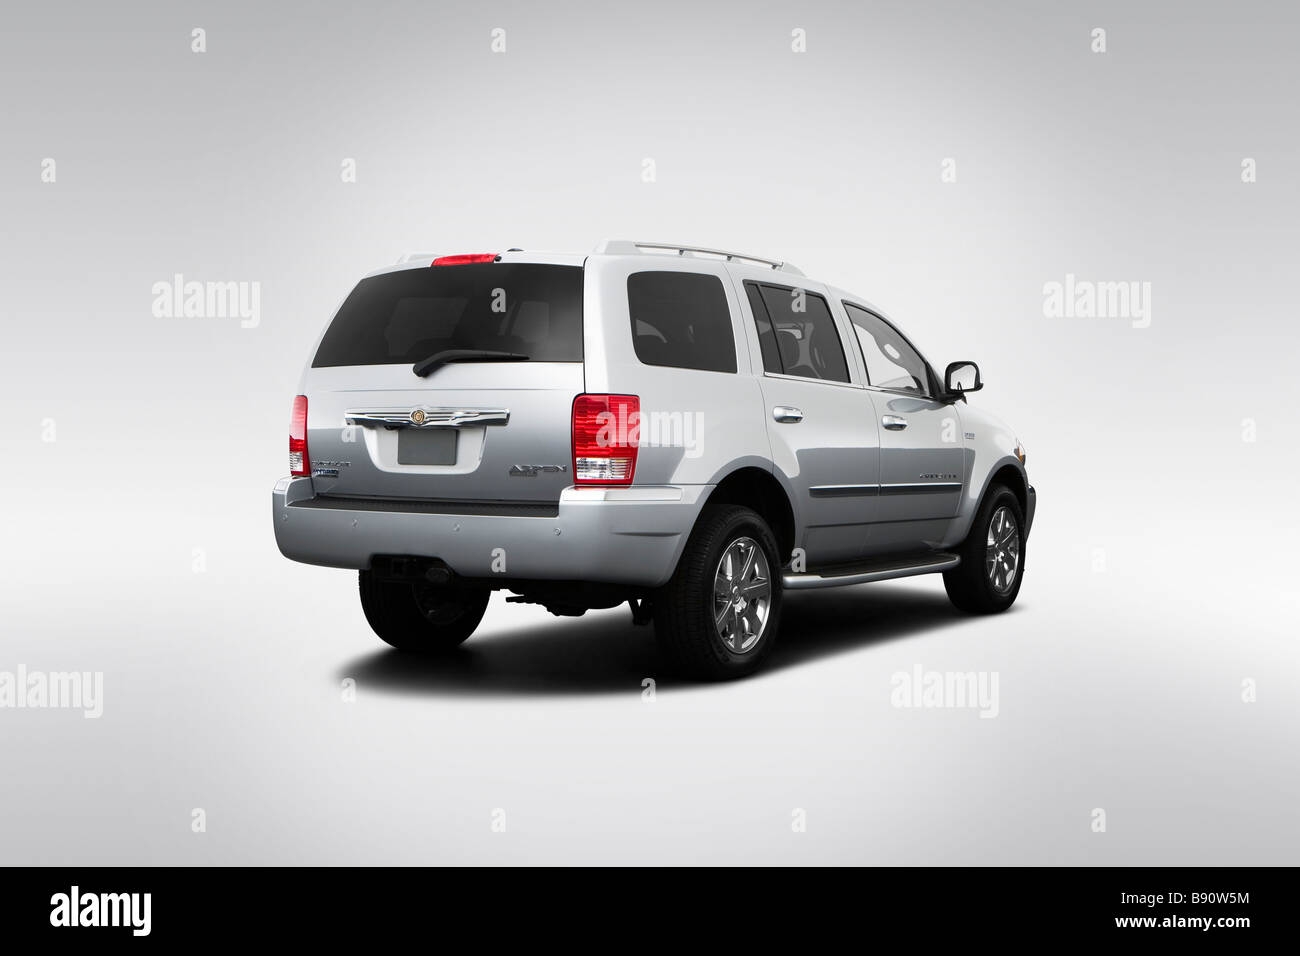 2009 Chrysler Aspen Hybrid Limited in Silver - Rear angle view Stock Photo  - Alamy